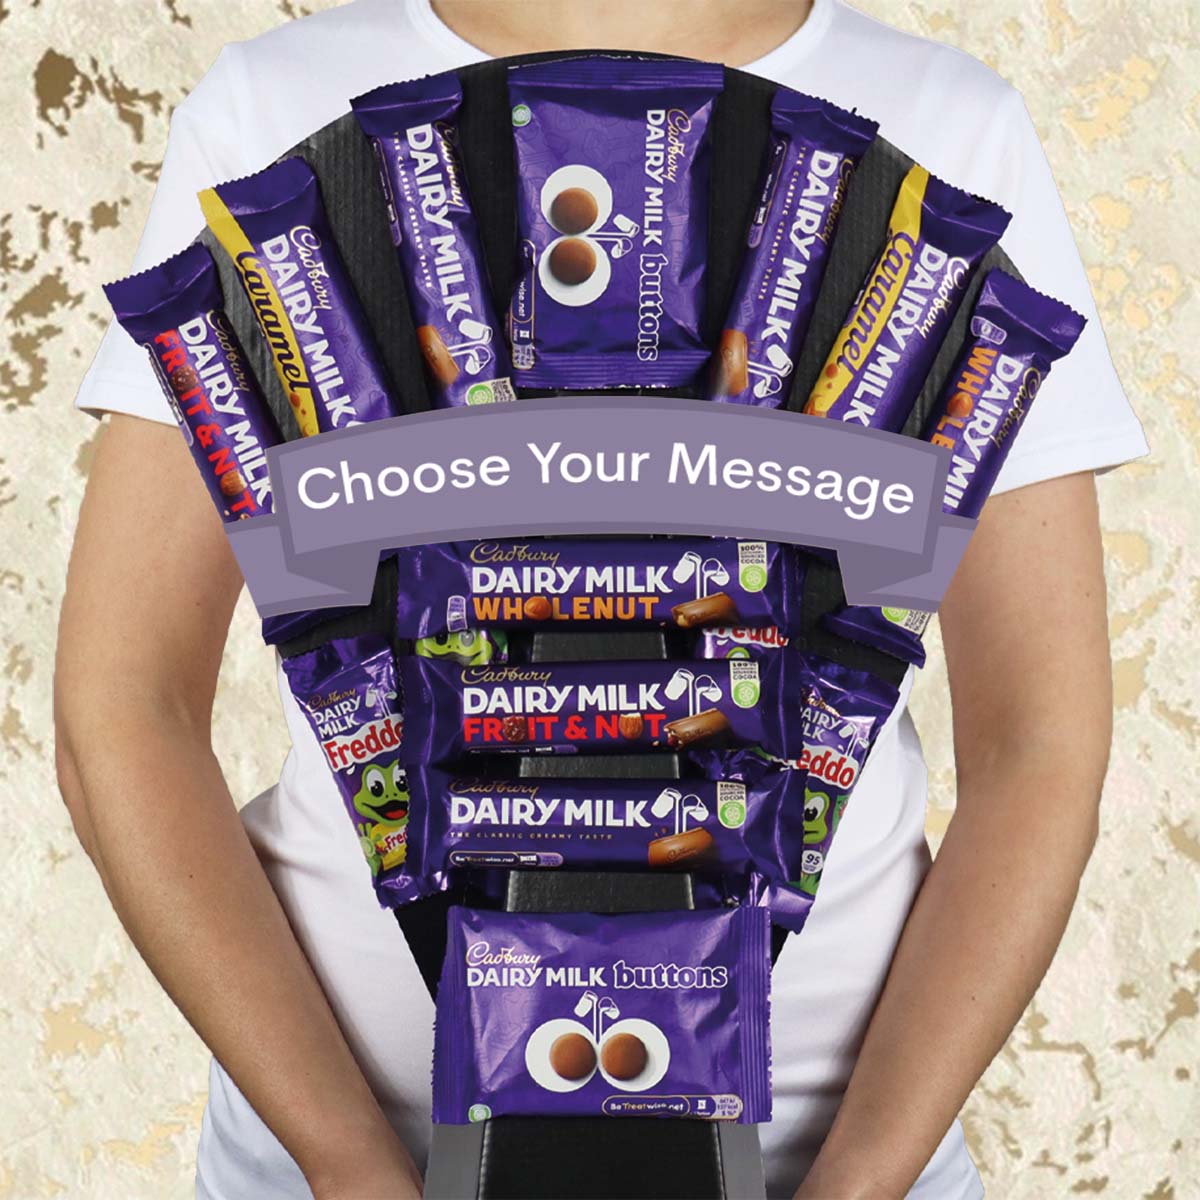 Large Dairy Milk Selection Chocolate Bouquet With Buttons, Whole Nut, Fruit & Nut, Caramel & More - Gift Hamper Box by HamperWell